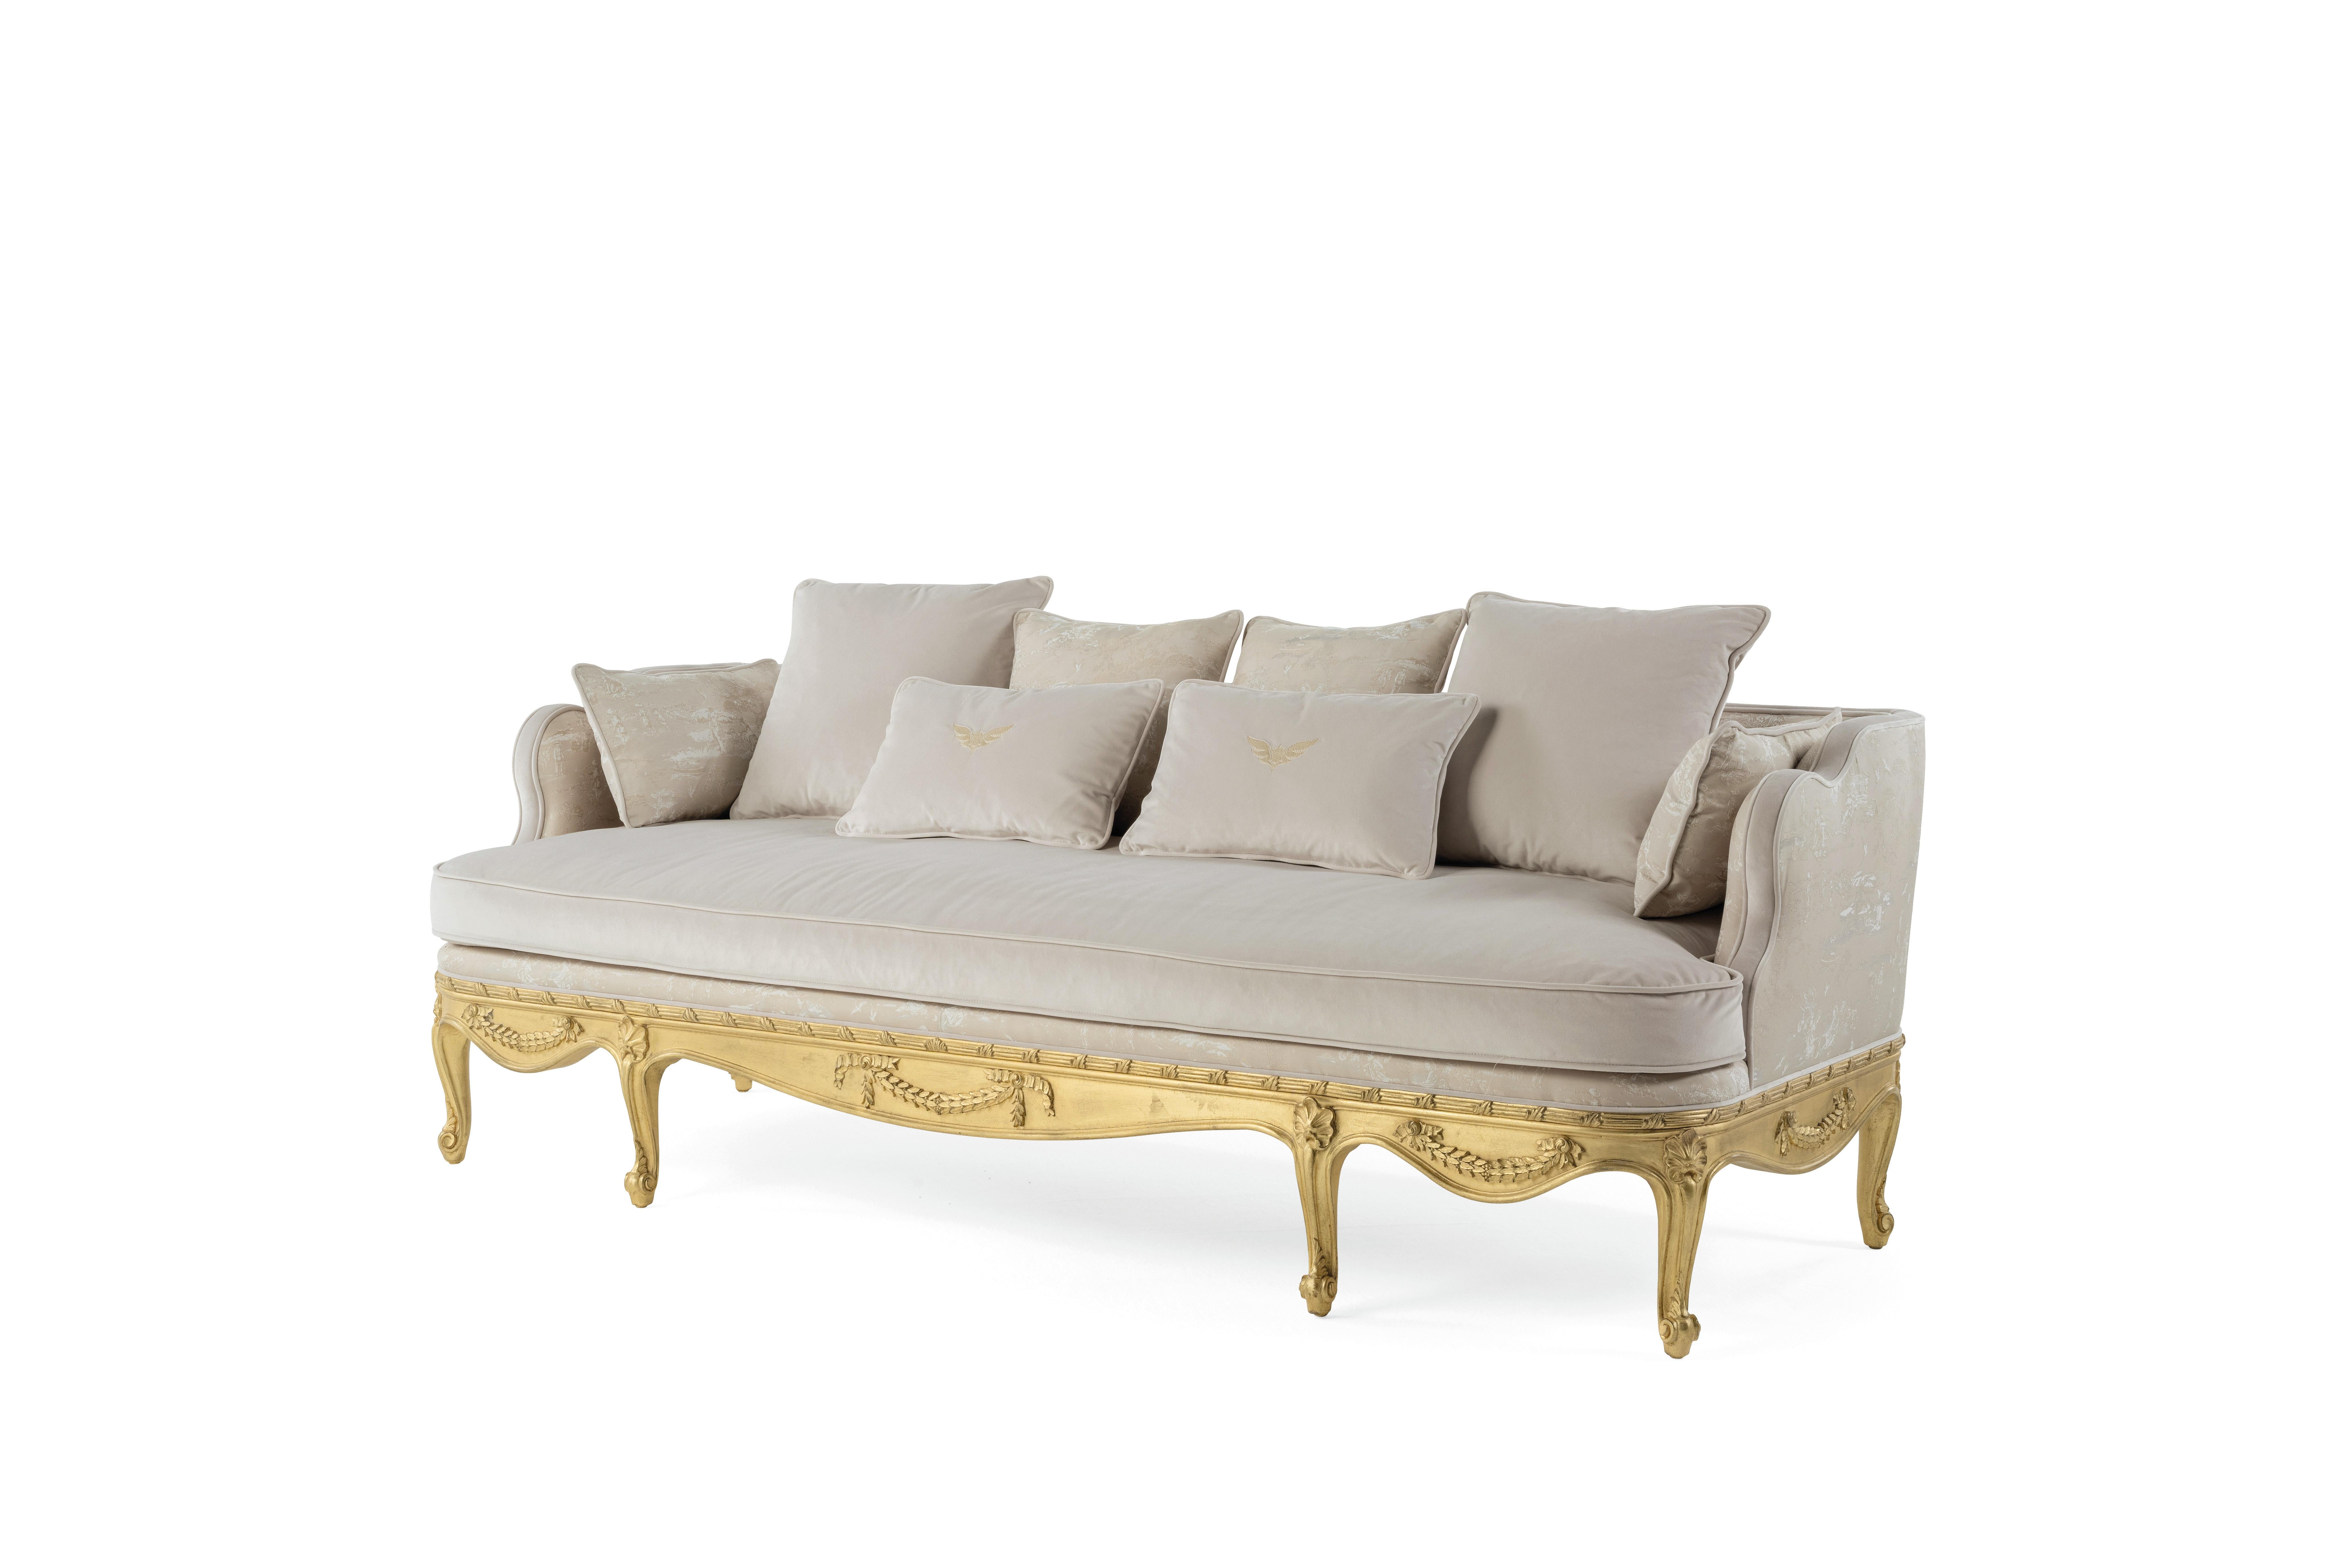 Sensual and welcoming, Verveine furniture embellishes any environment with its French flavor. In addition to the base in hand-carved wood with patinated antique gold finishing, Verveine is characterized by the complex wave-style upholstery of the